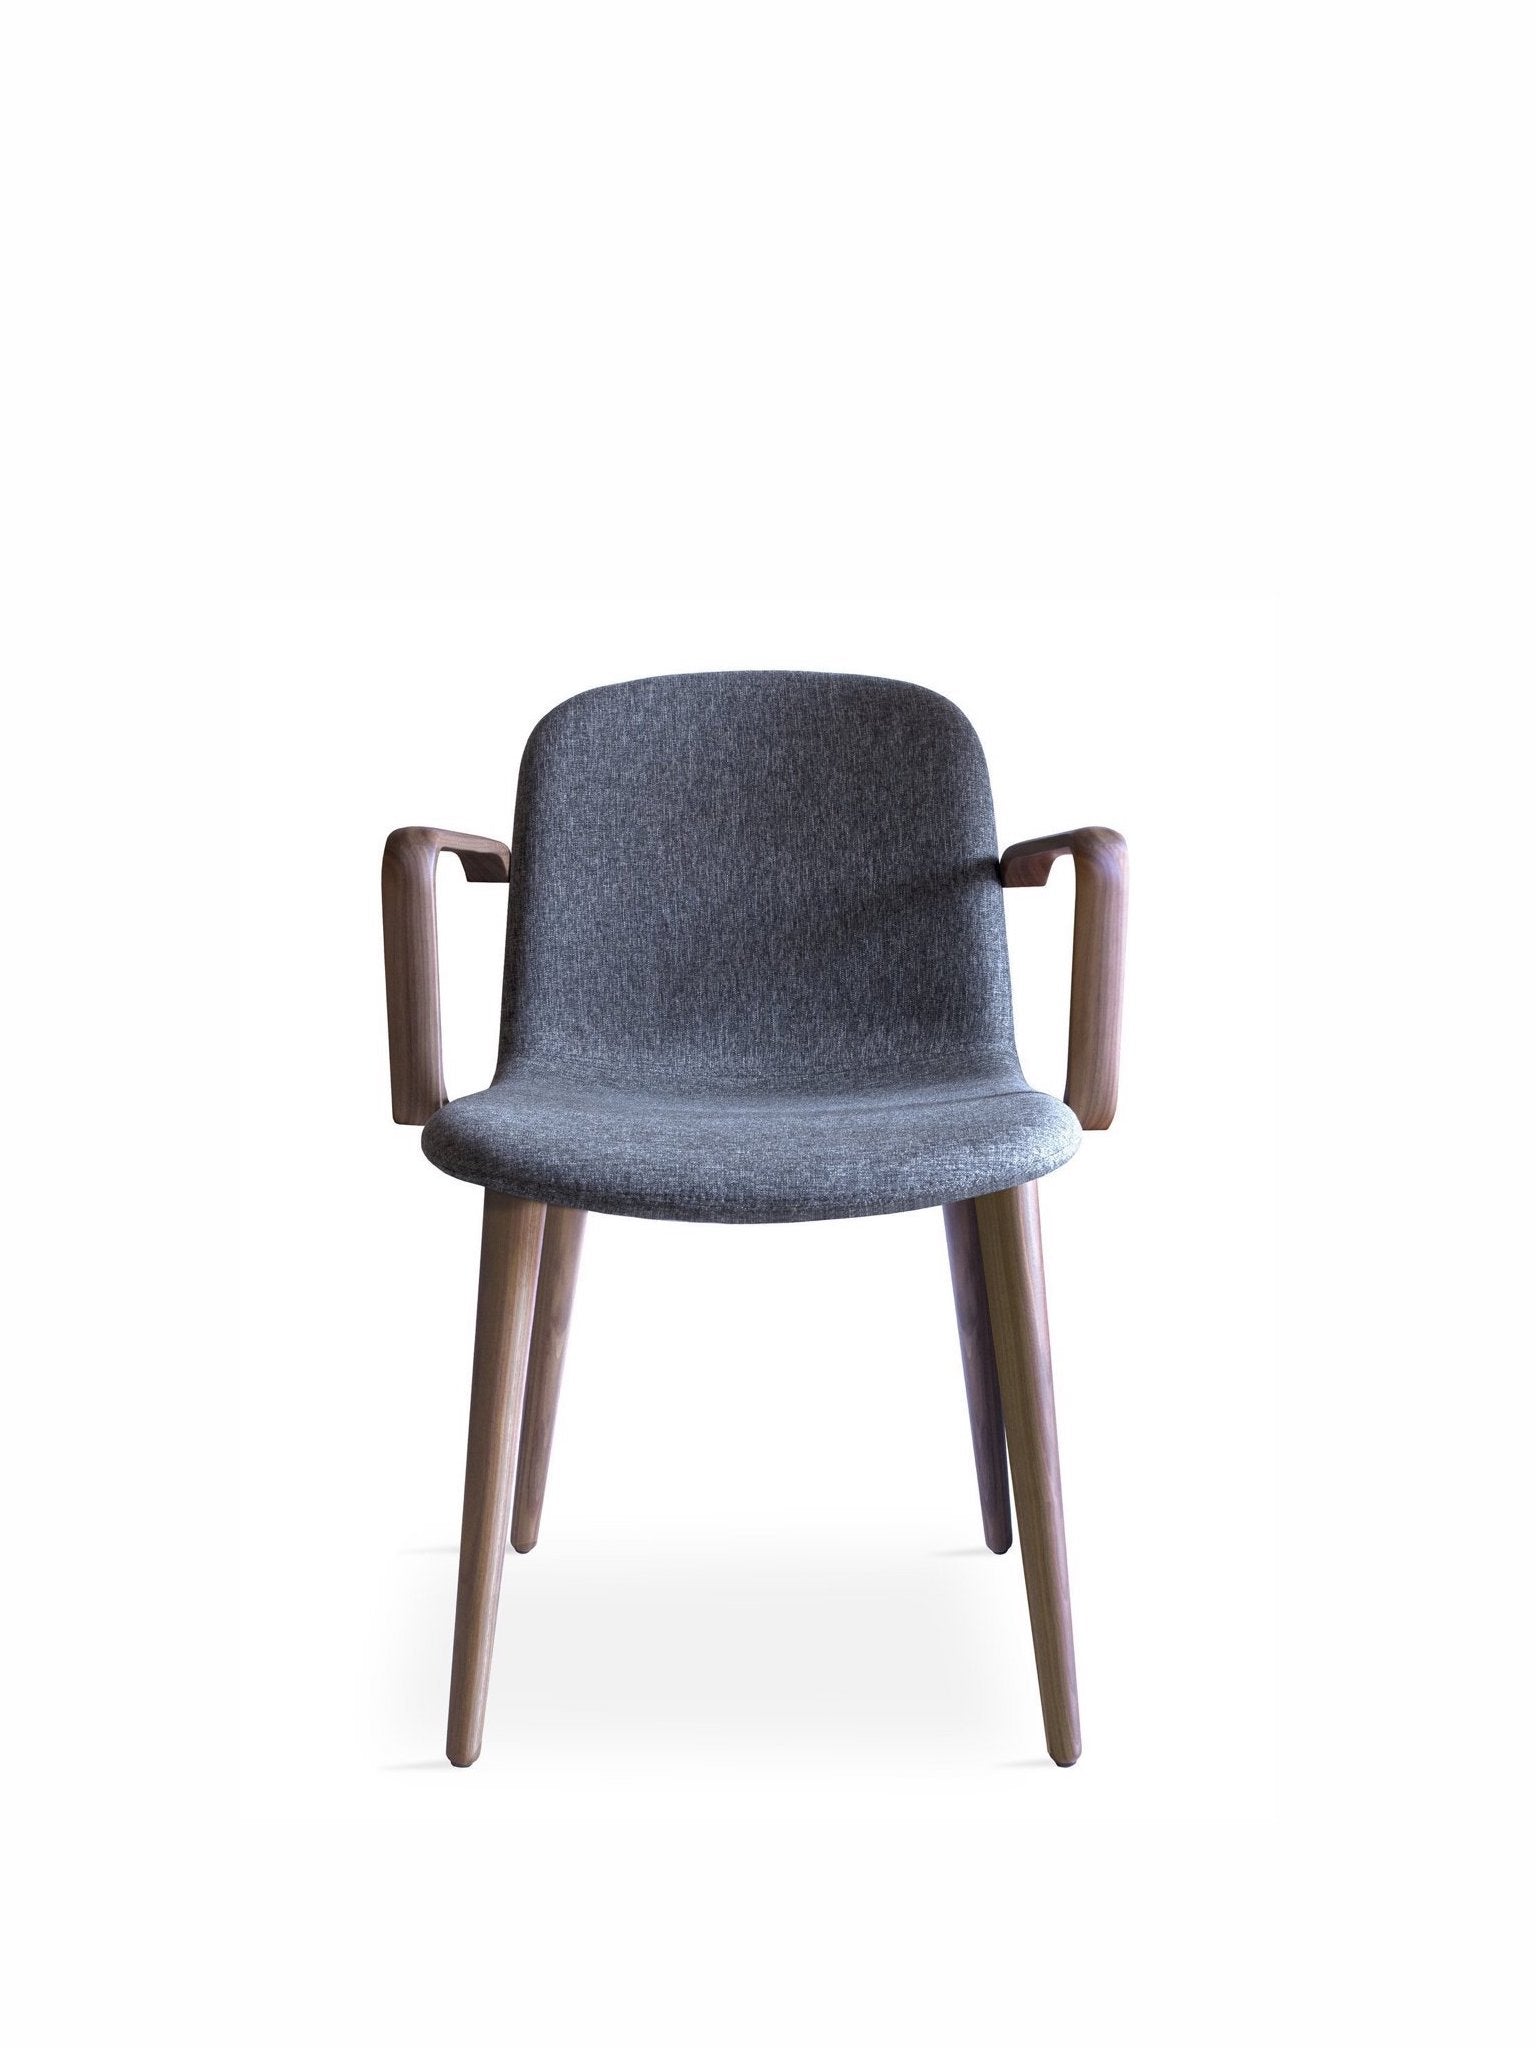 Bacco Armchair-Job's-Contract Furniture Store